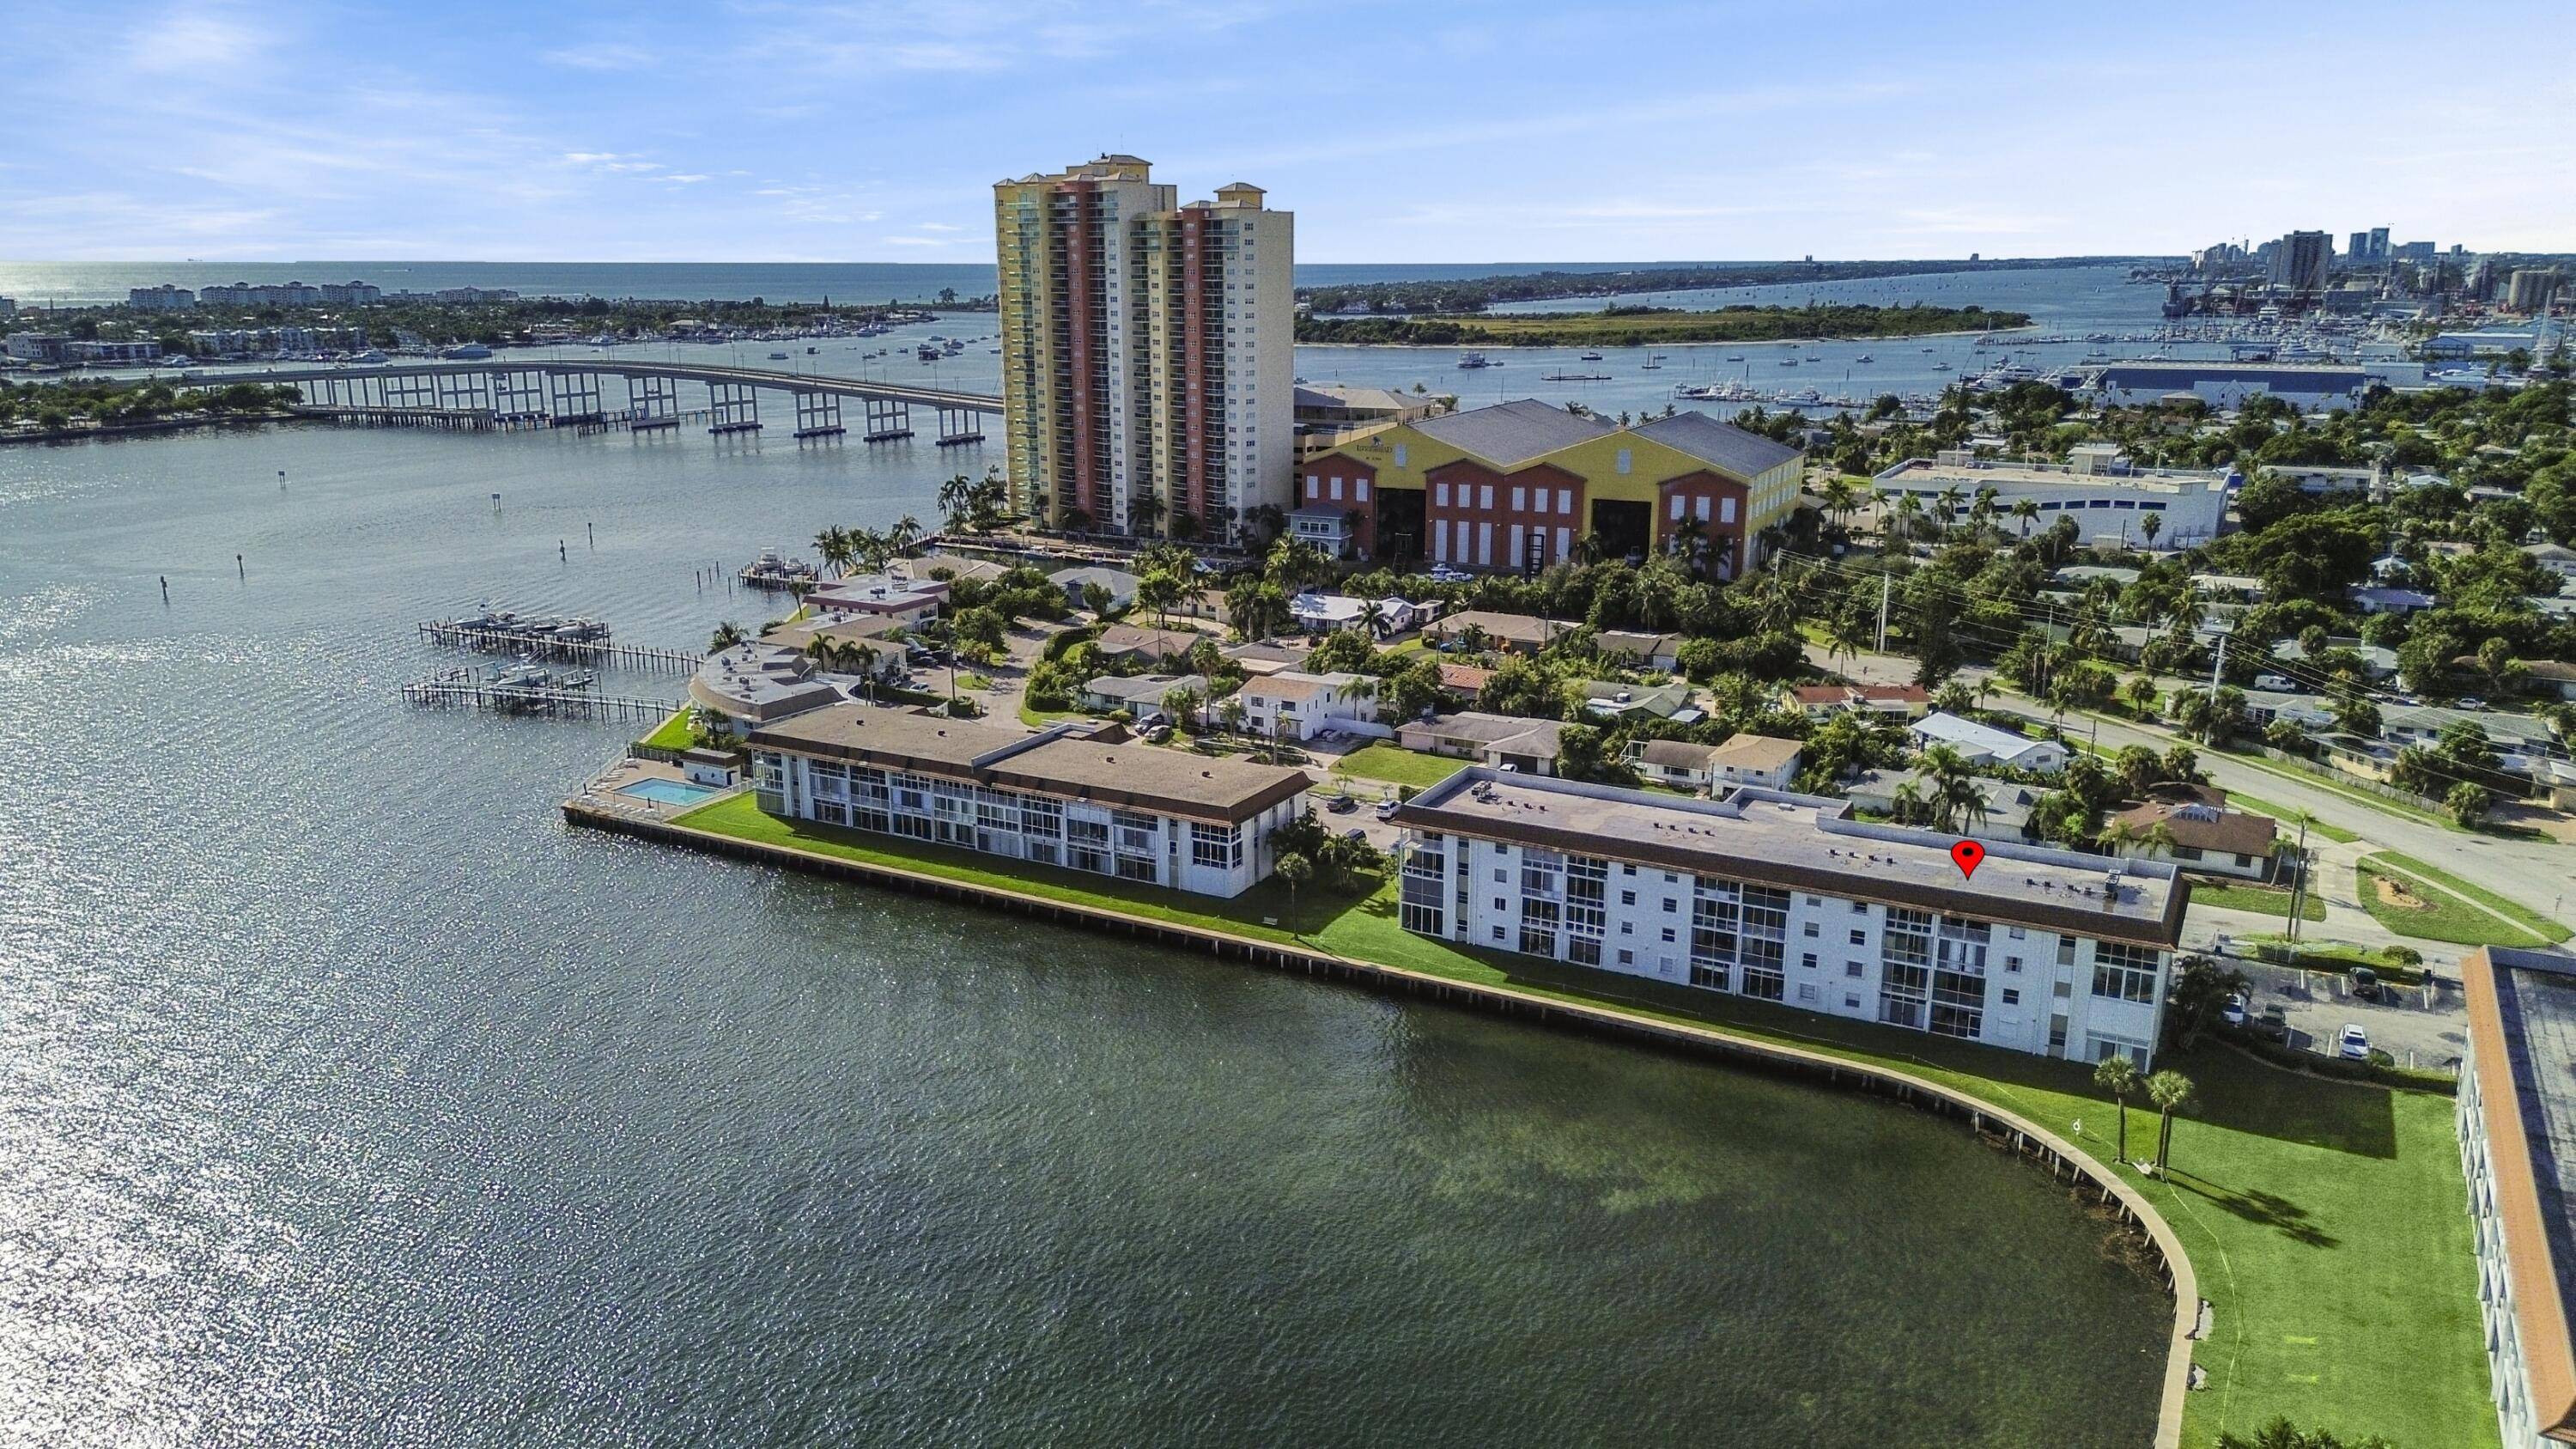 Bask in unobstructed Intracoastal views from this fully renovated waterfront condo.